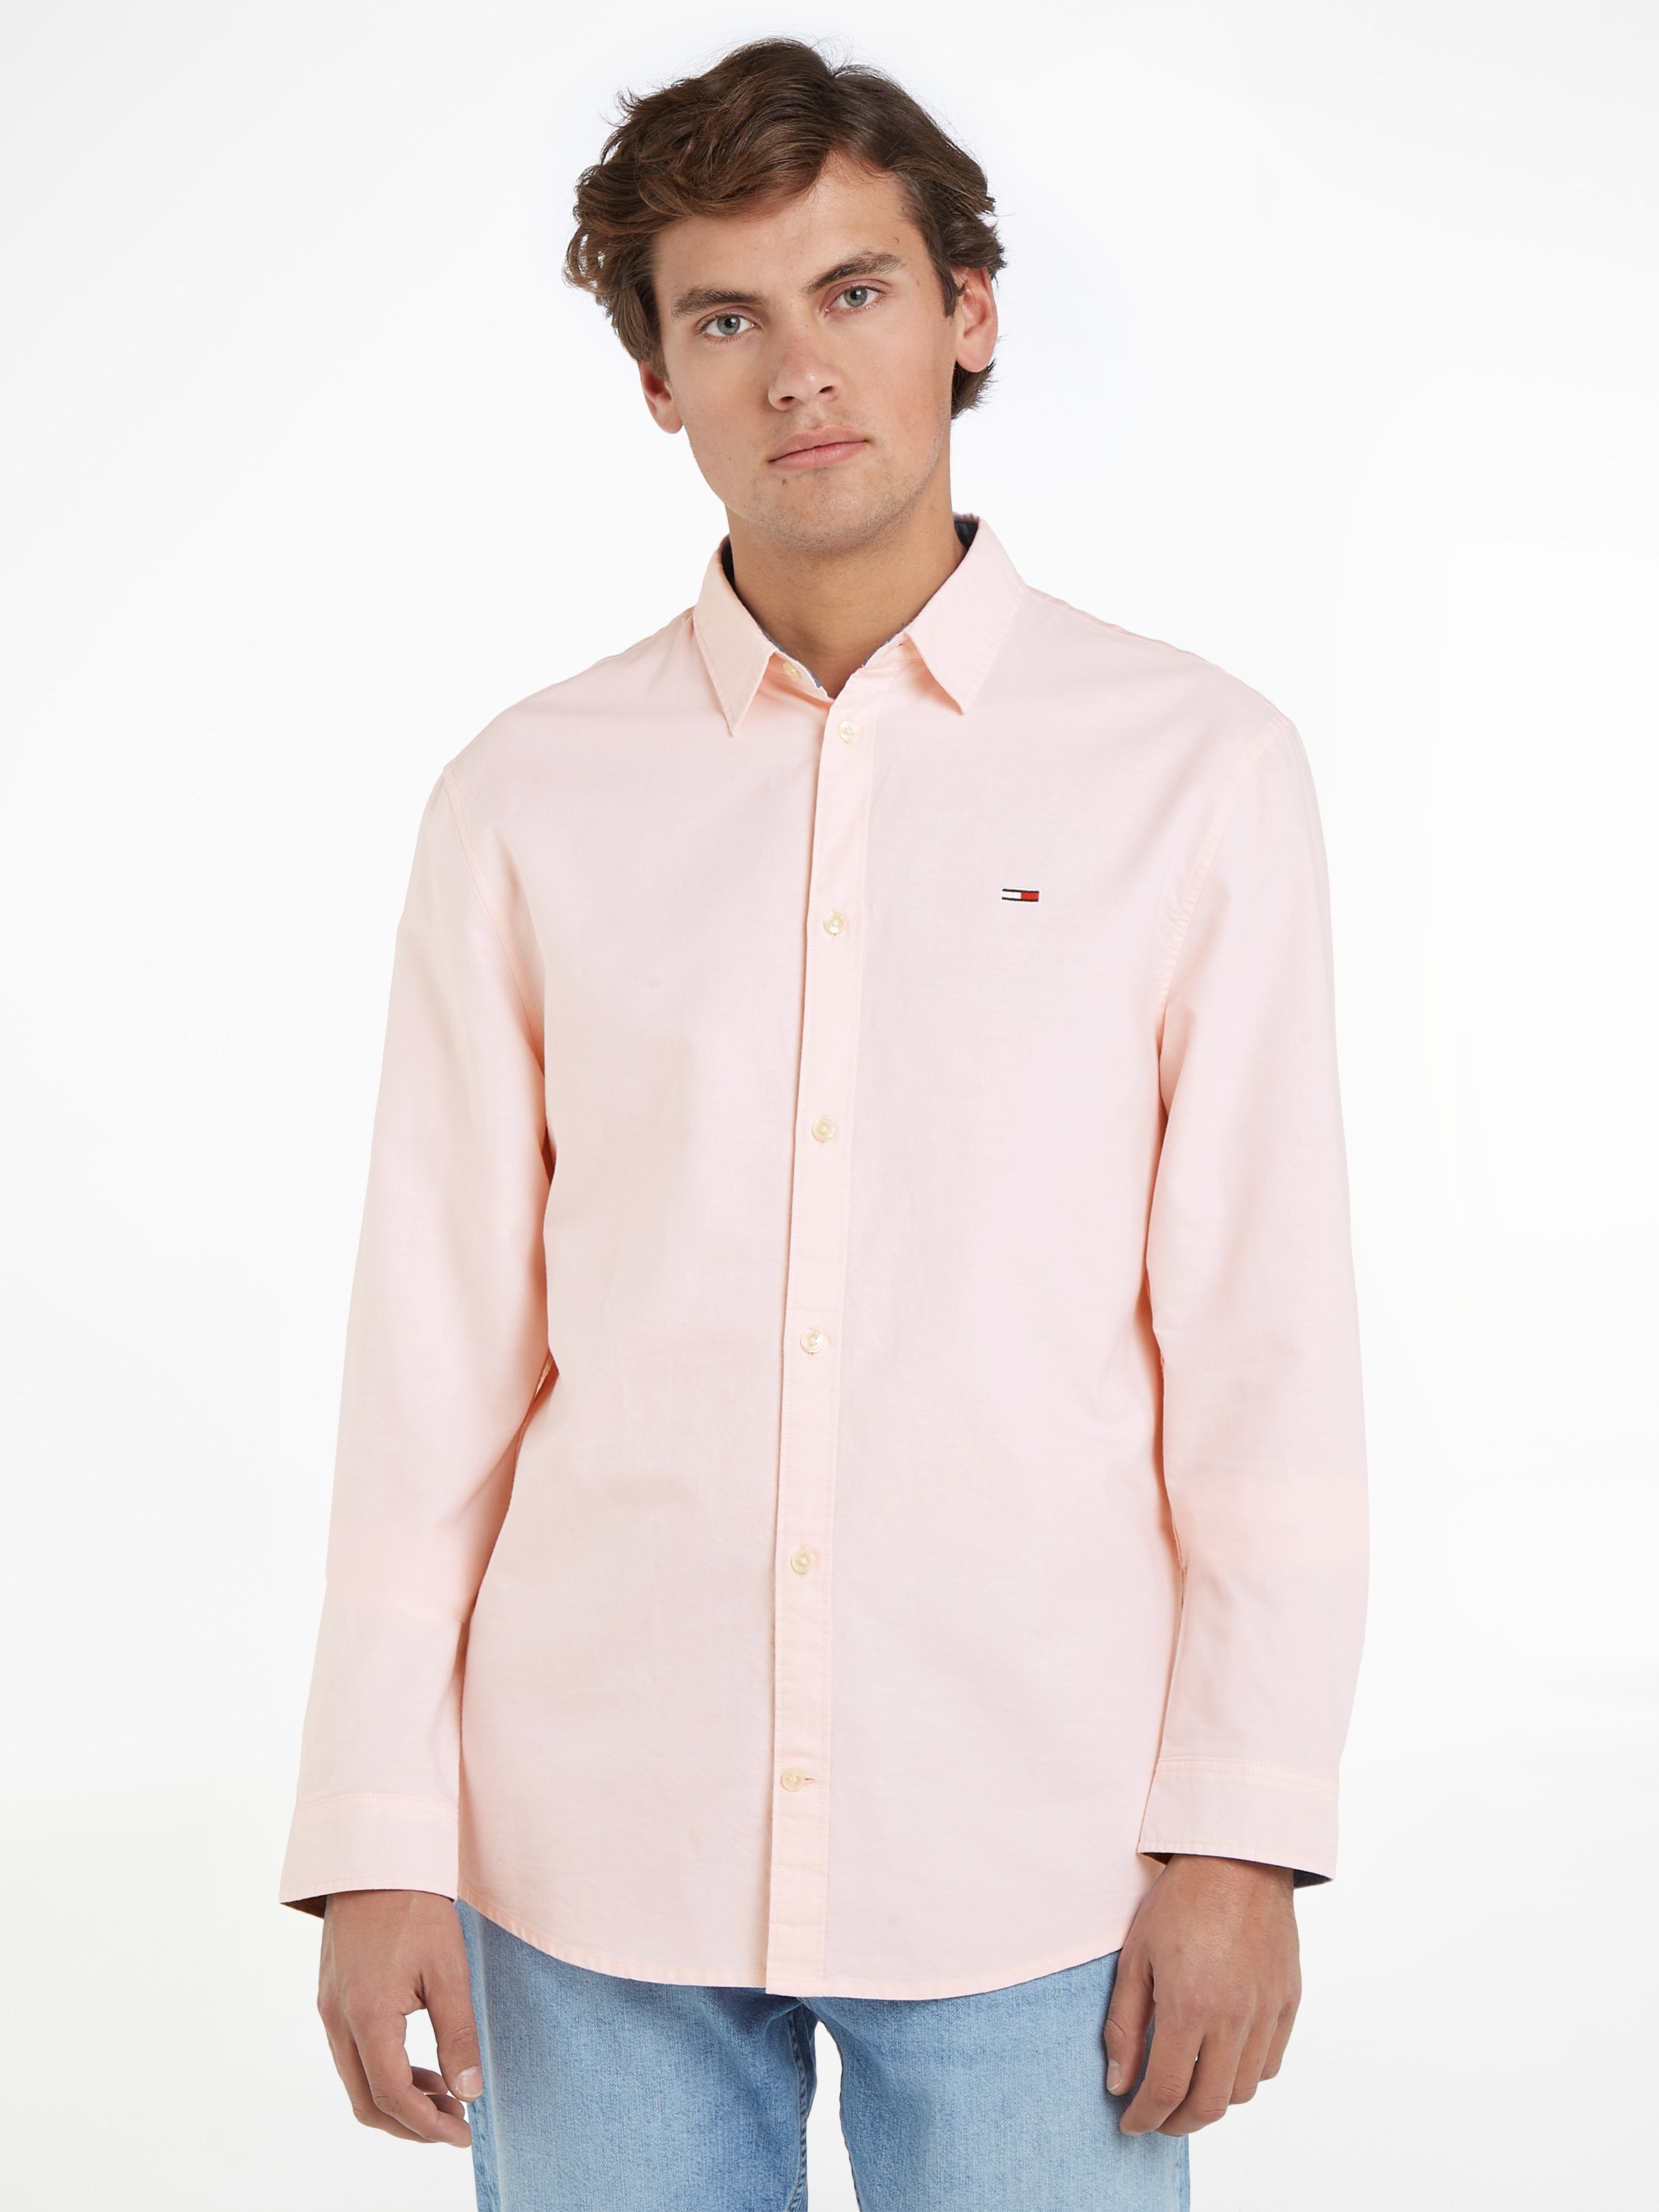 Tommy Jeans Langarmhemd CLASSIC OTTO bei SHIRT« shoppen »TJM online OXFORD